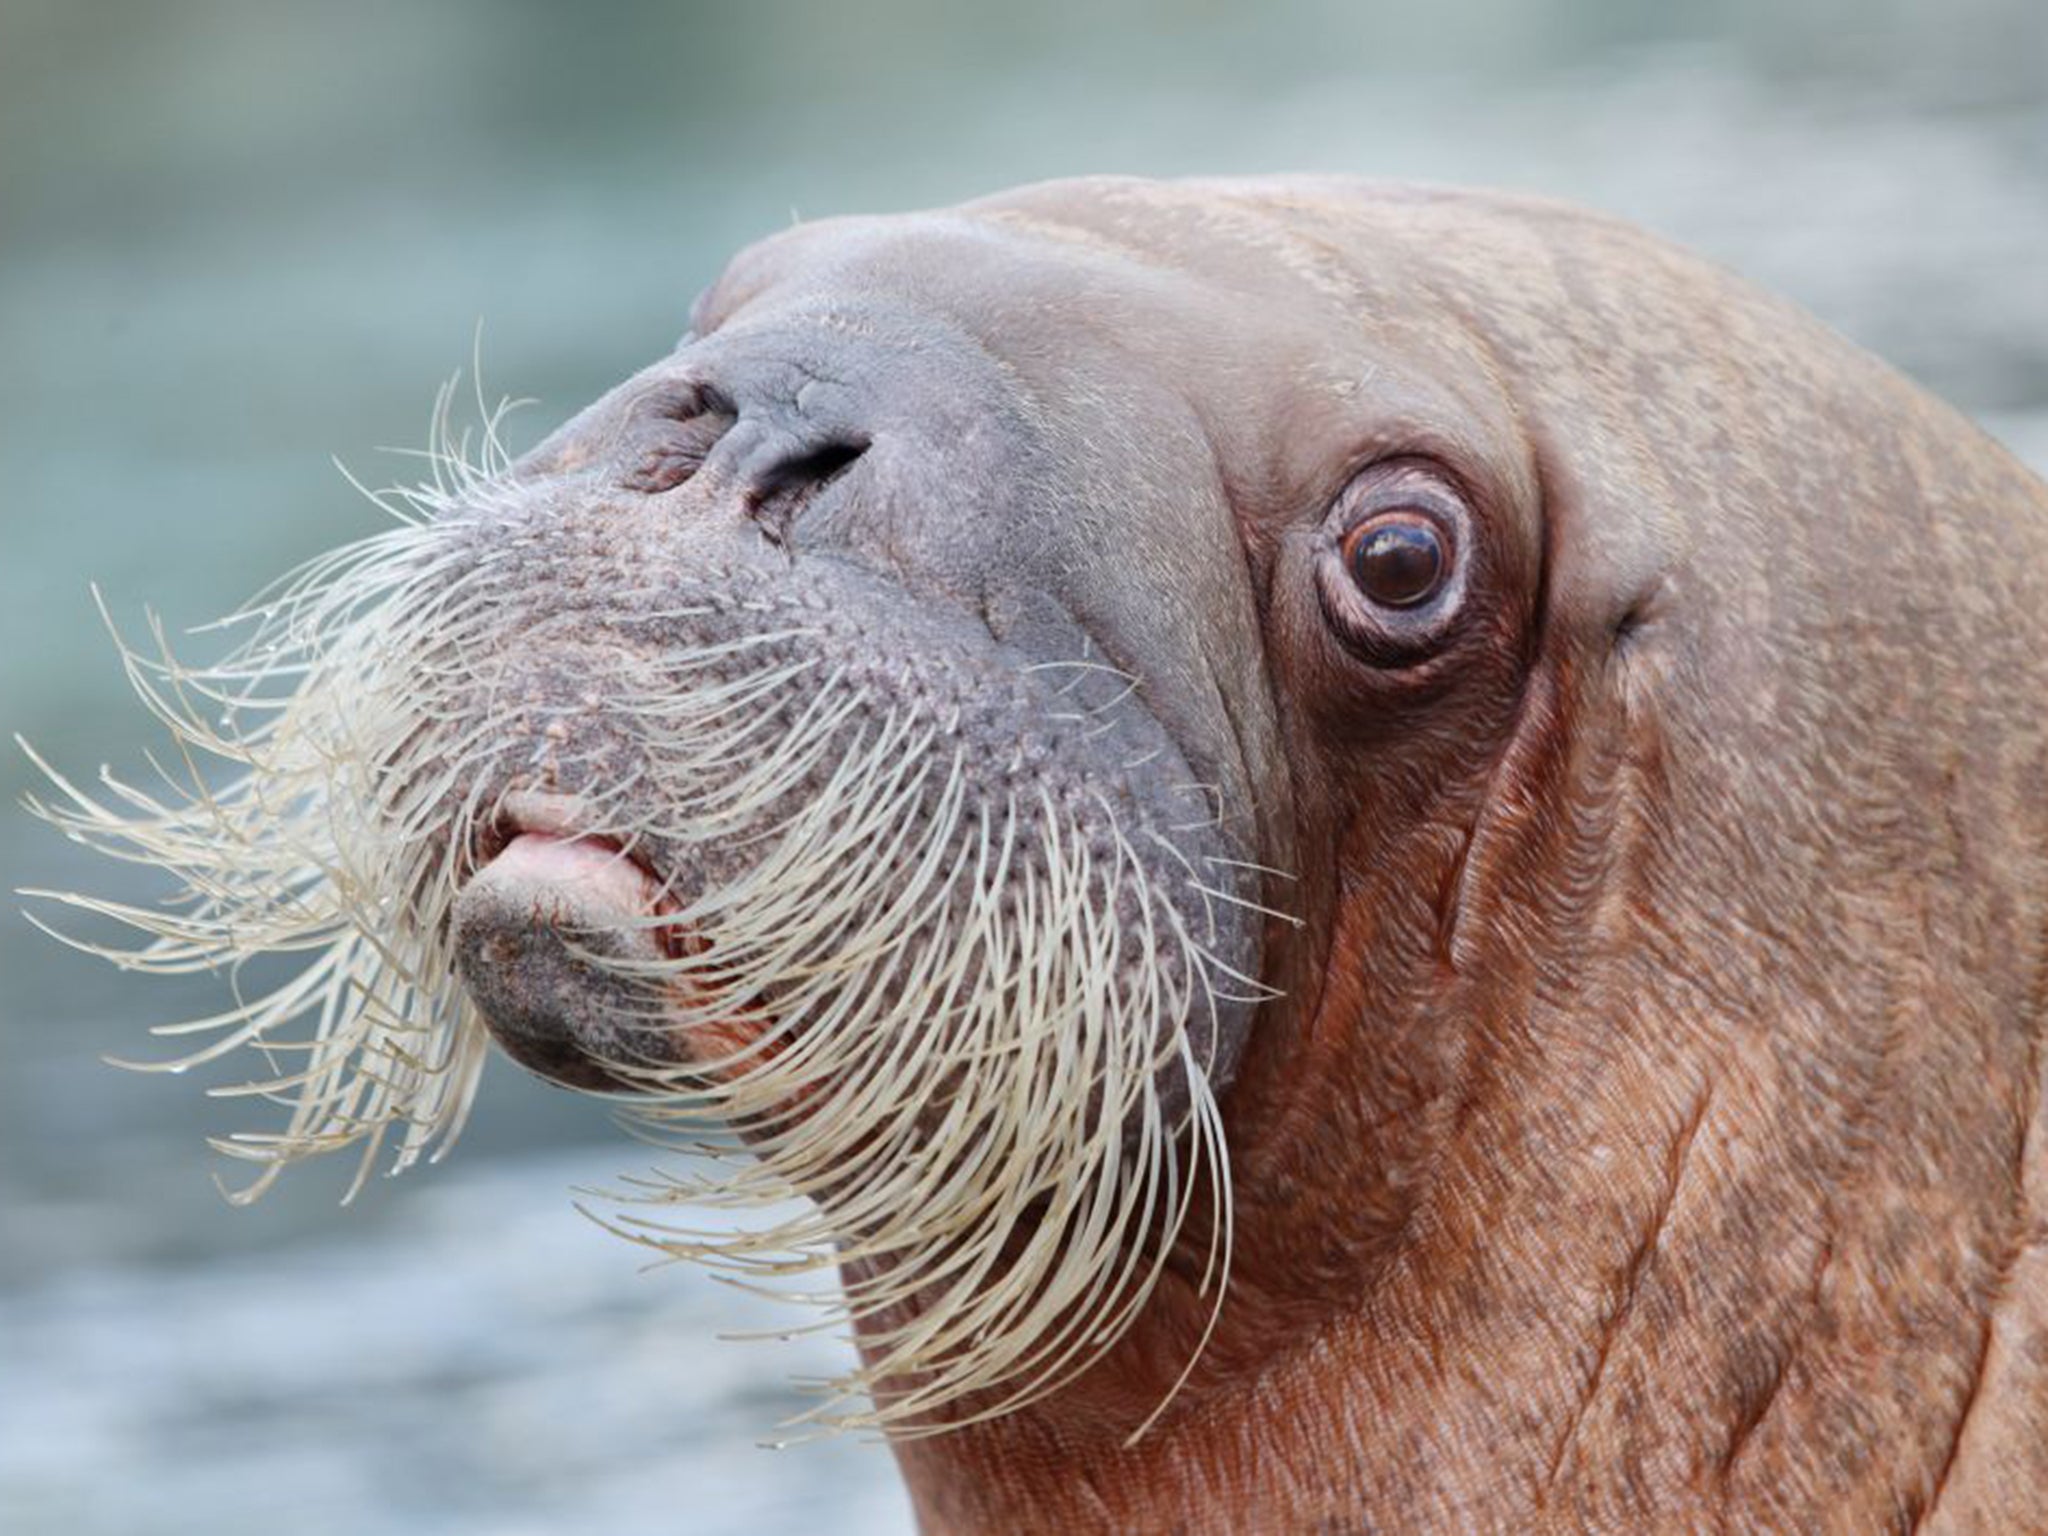 'Walrus' has no rhyme in the English language